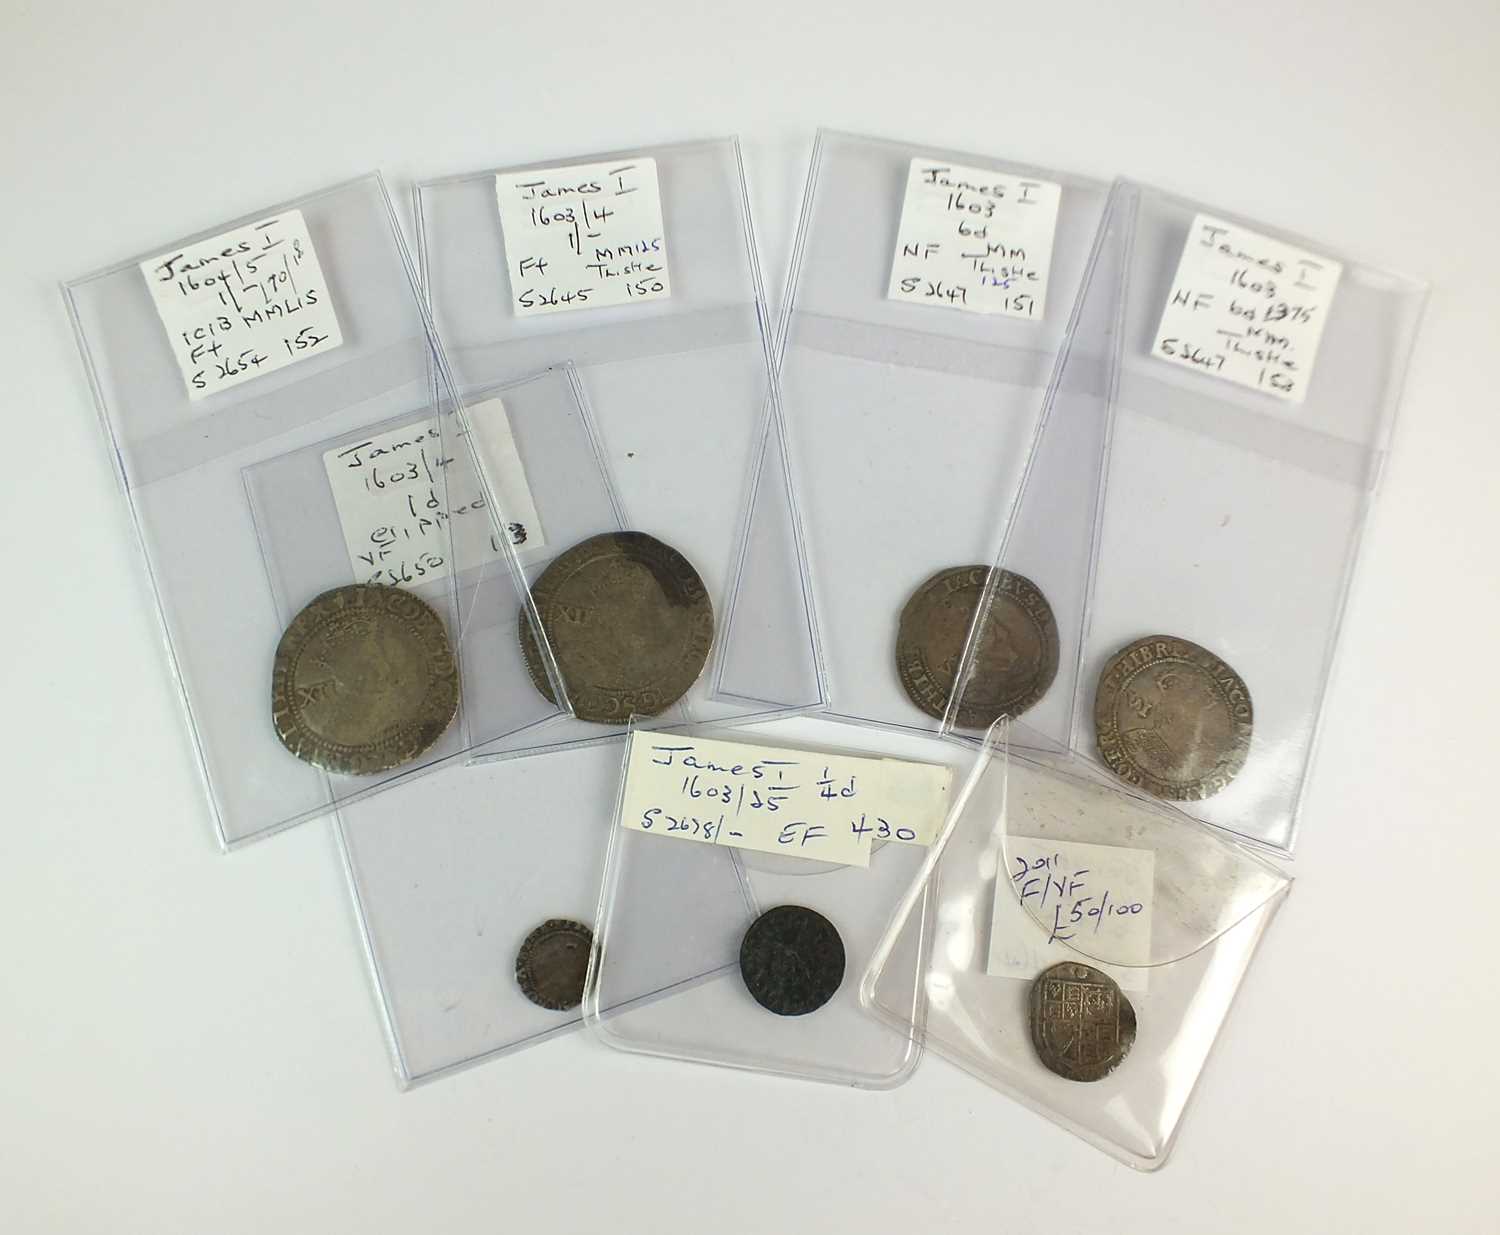 A collection of James I coinage